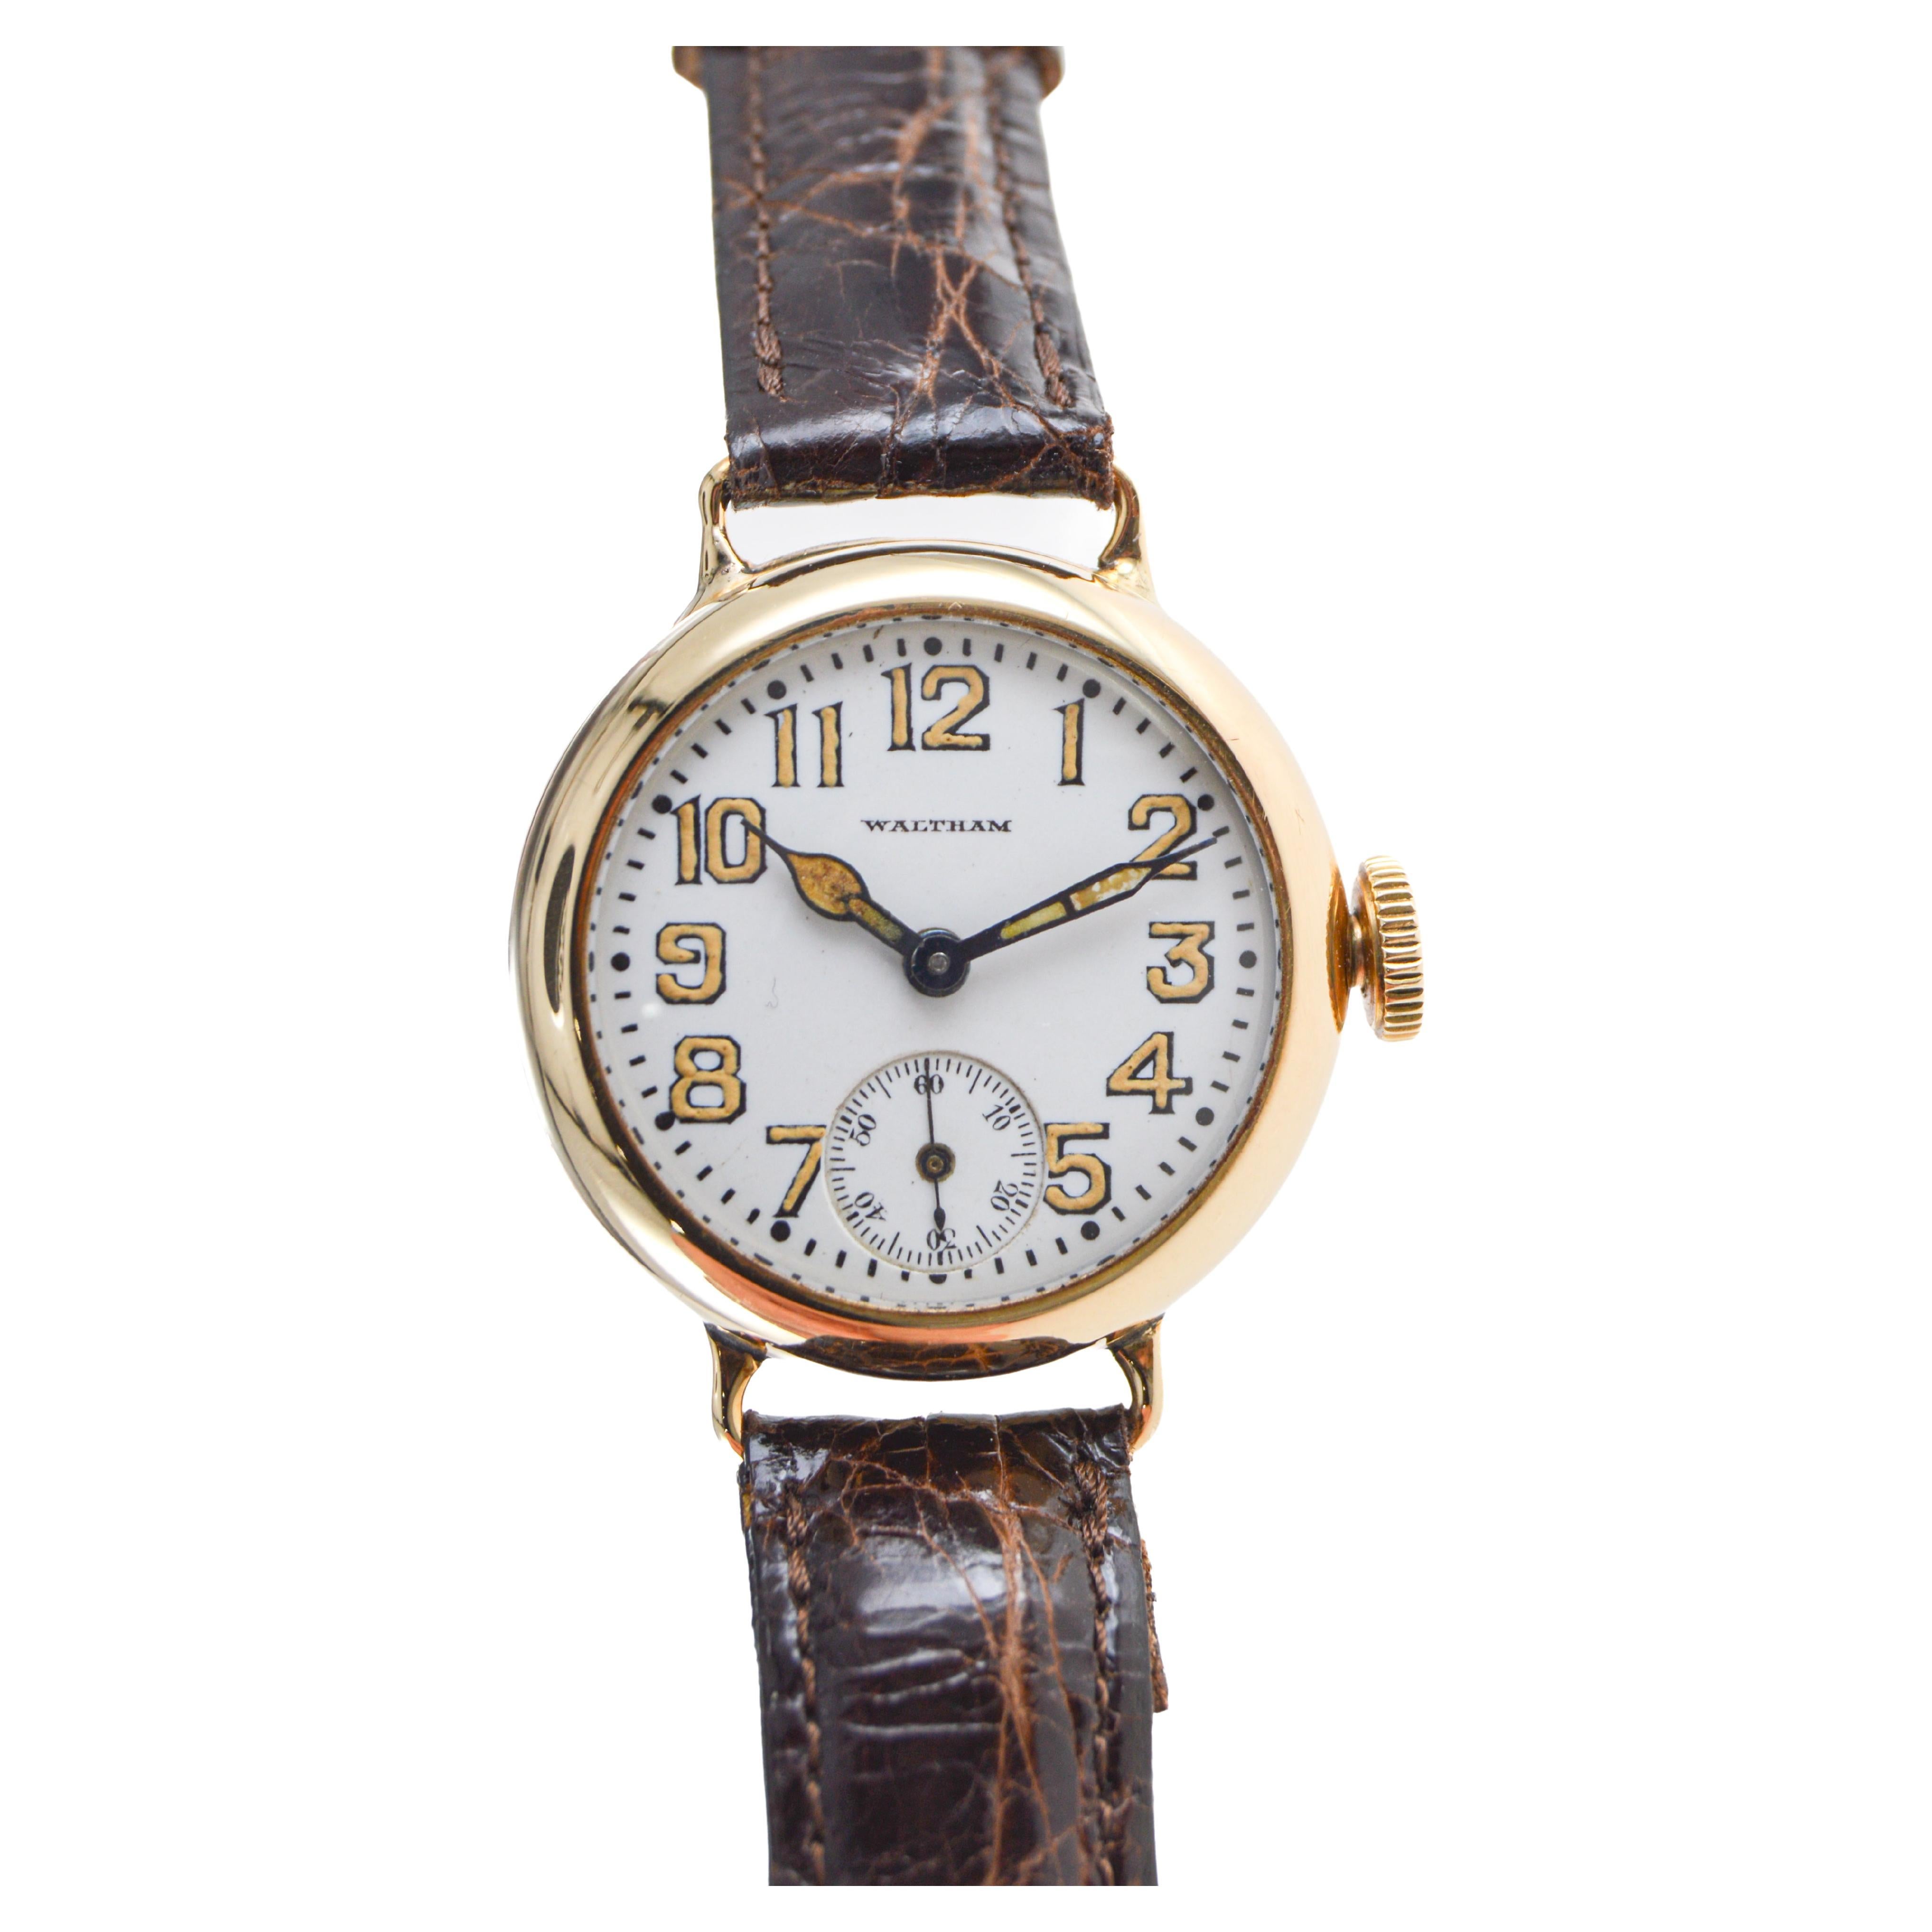 Women's or Men's Waltham 14Kt. Gold Campaign Style Watch from 1915 with Original Enamel Dial 1929 For Sale